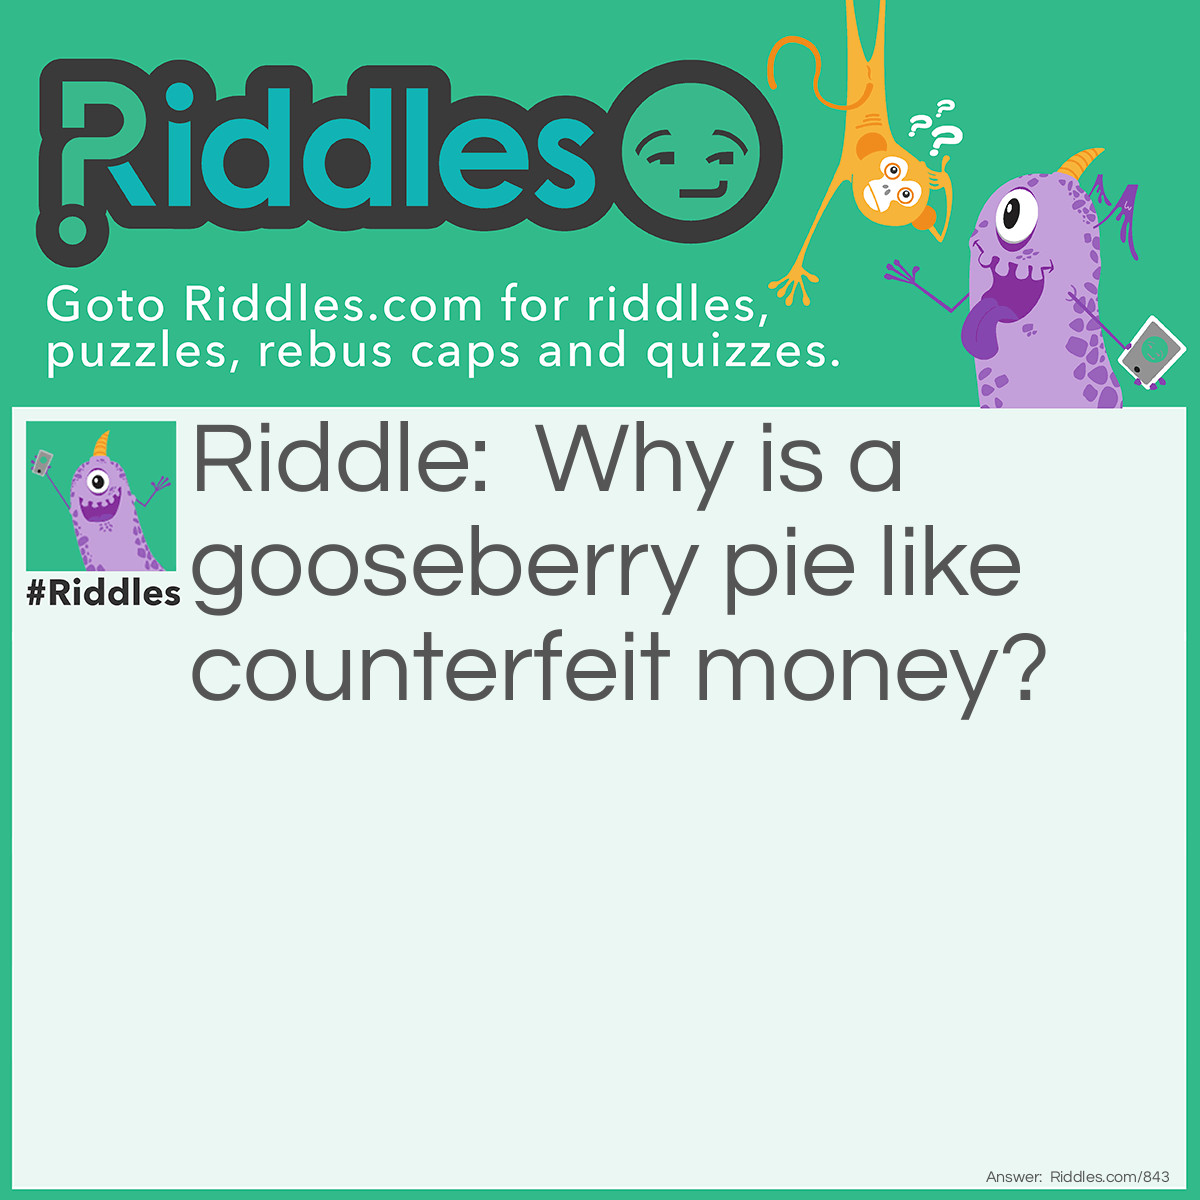 Riddle: Why is a gooseberry pie like counterfeit money? Answer: Because it is not currant (current).